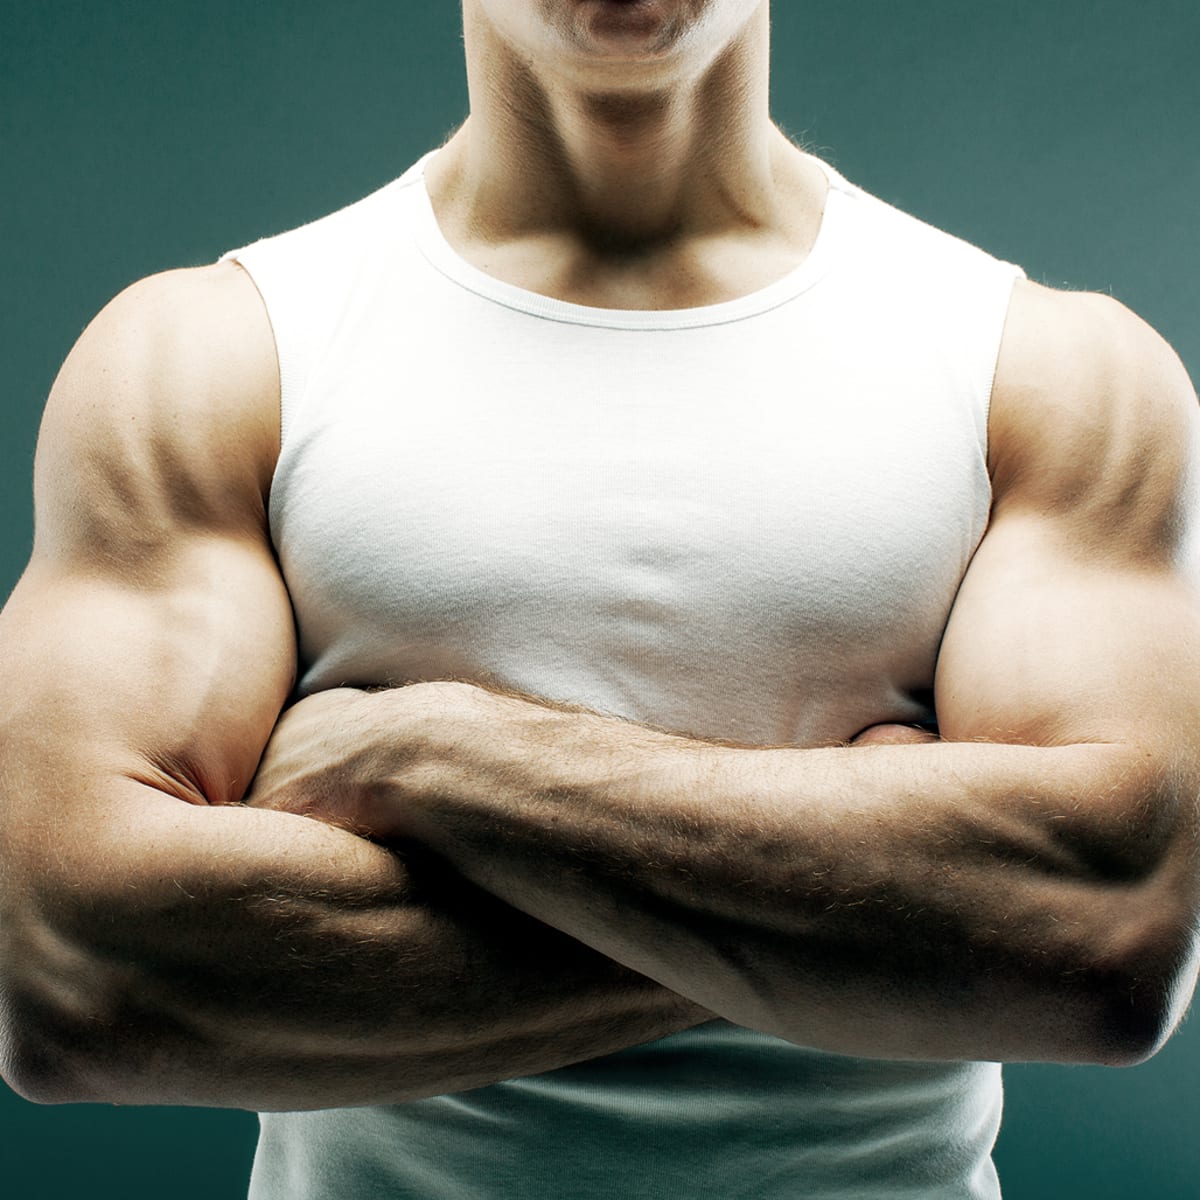 10 Things Every Skinny Guy Needs To